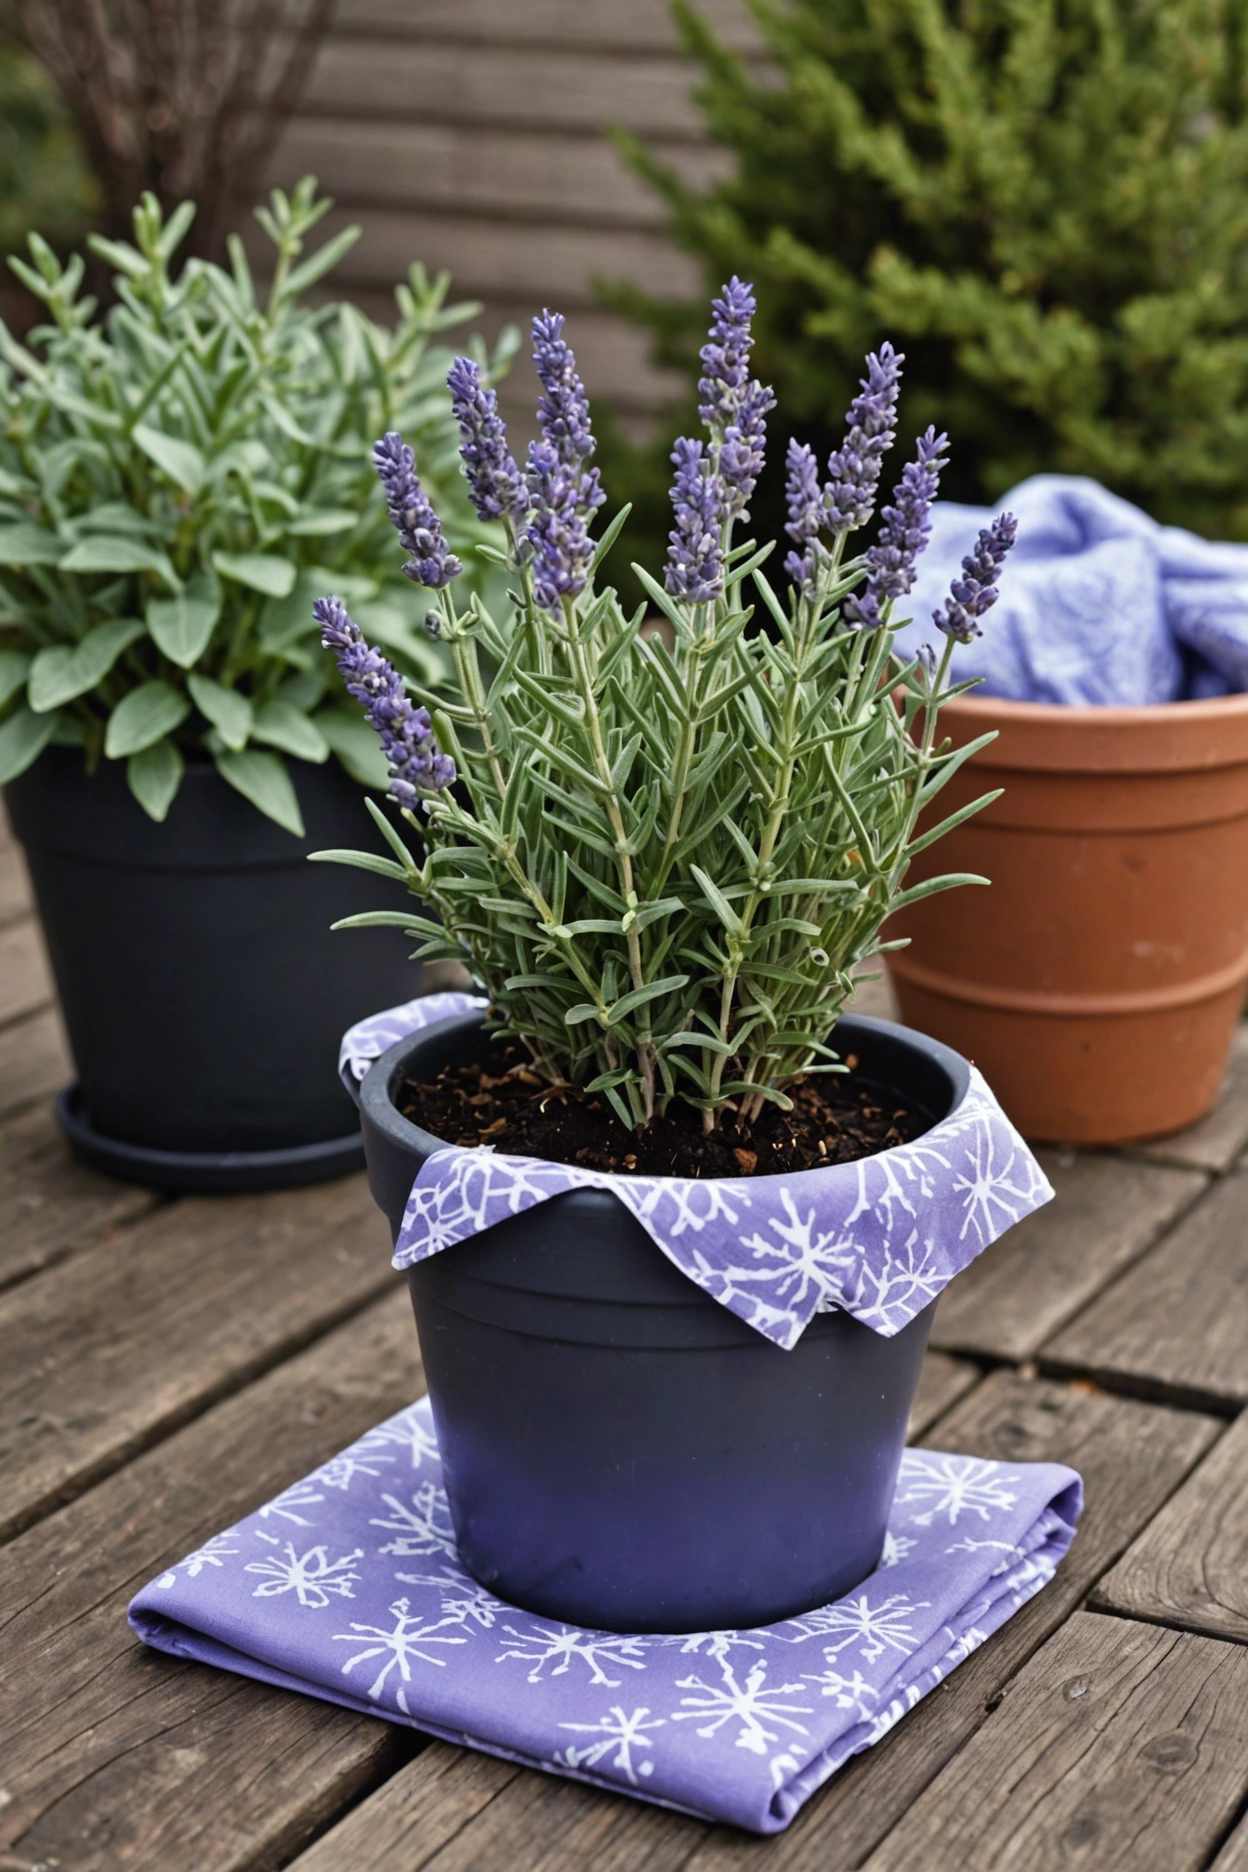 "A lavender plant covered with breathable fabric for frost protection, surrounded by fallen leaves, snowflakes and gardening tools."